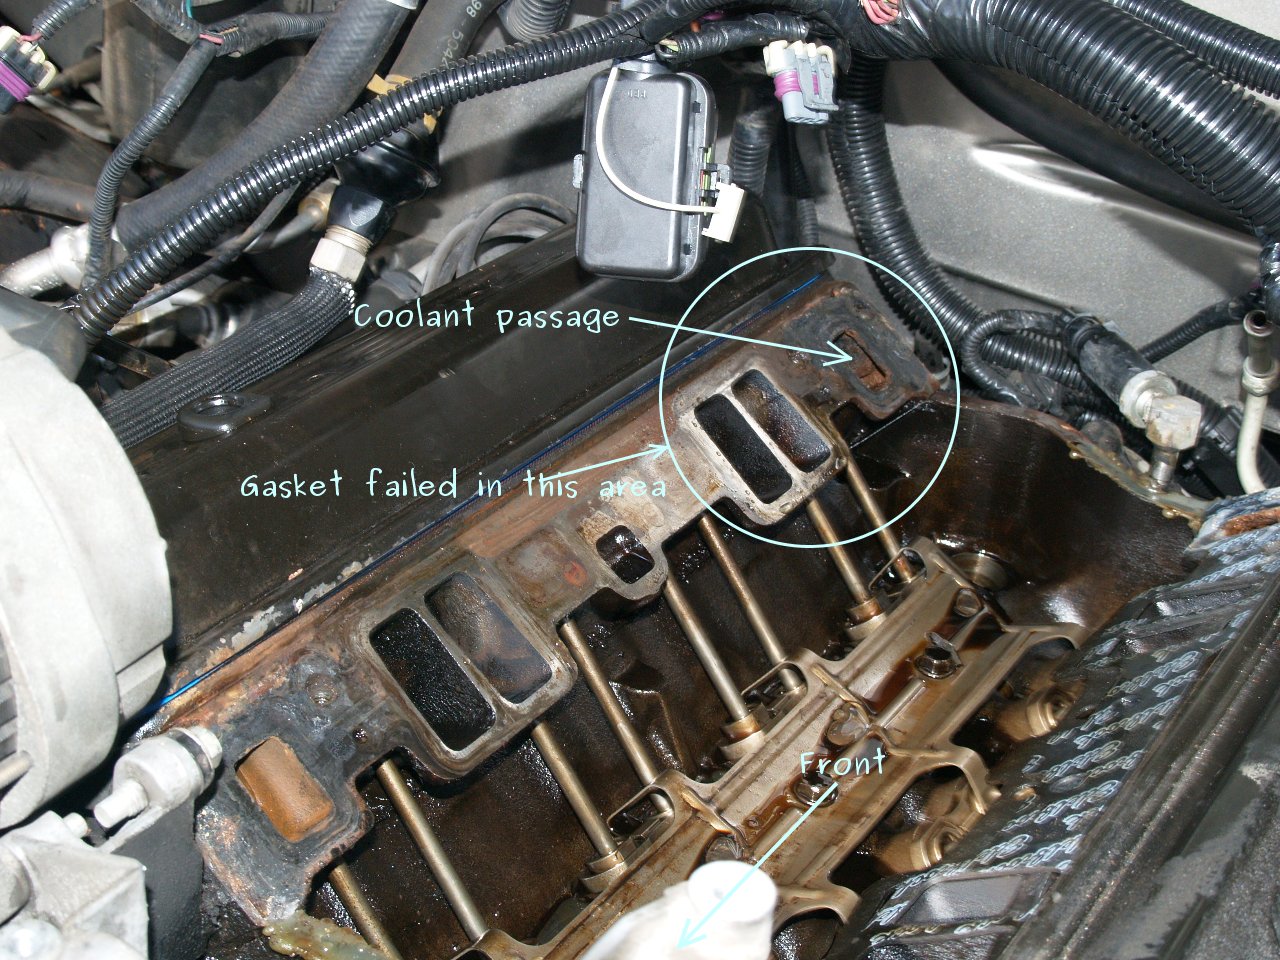 See P0A11 in engine